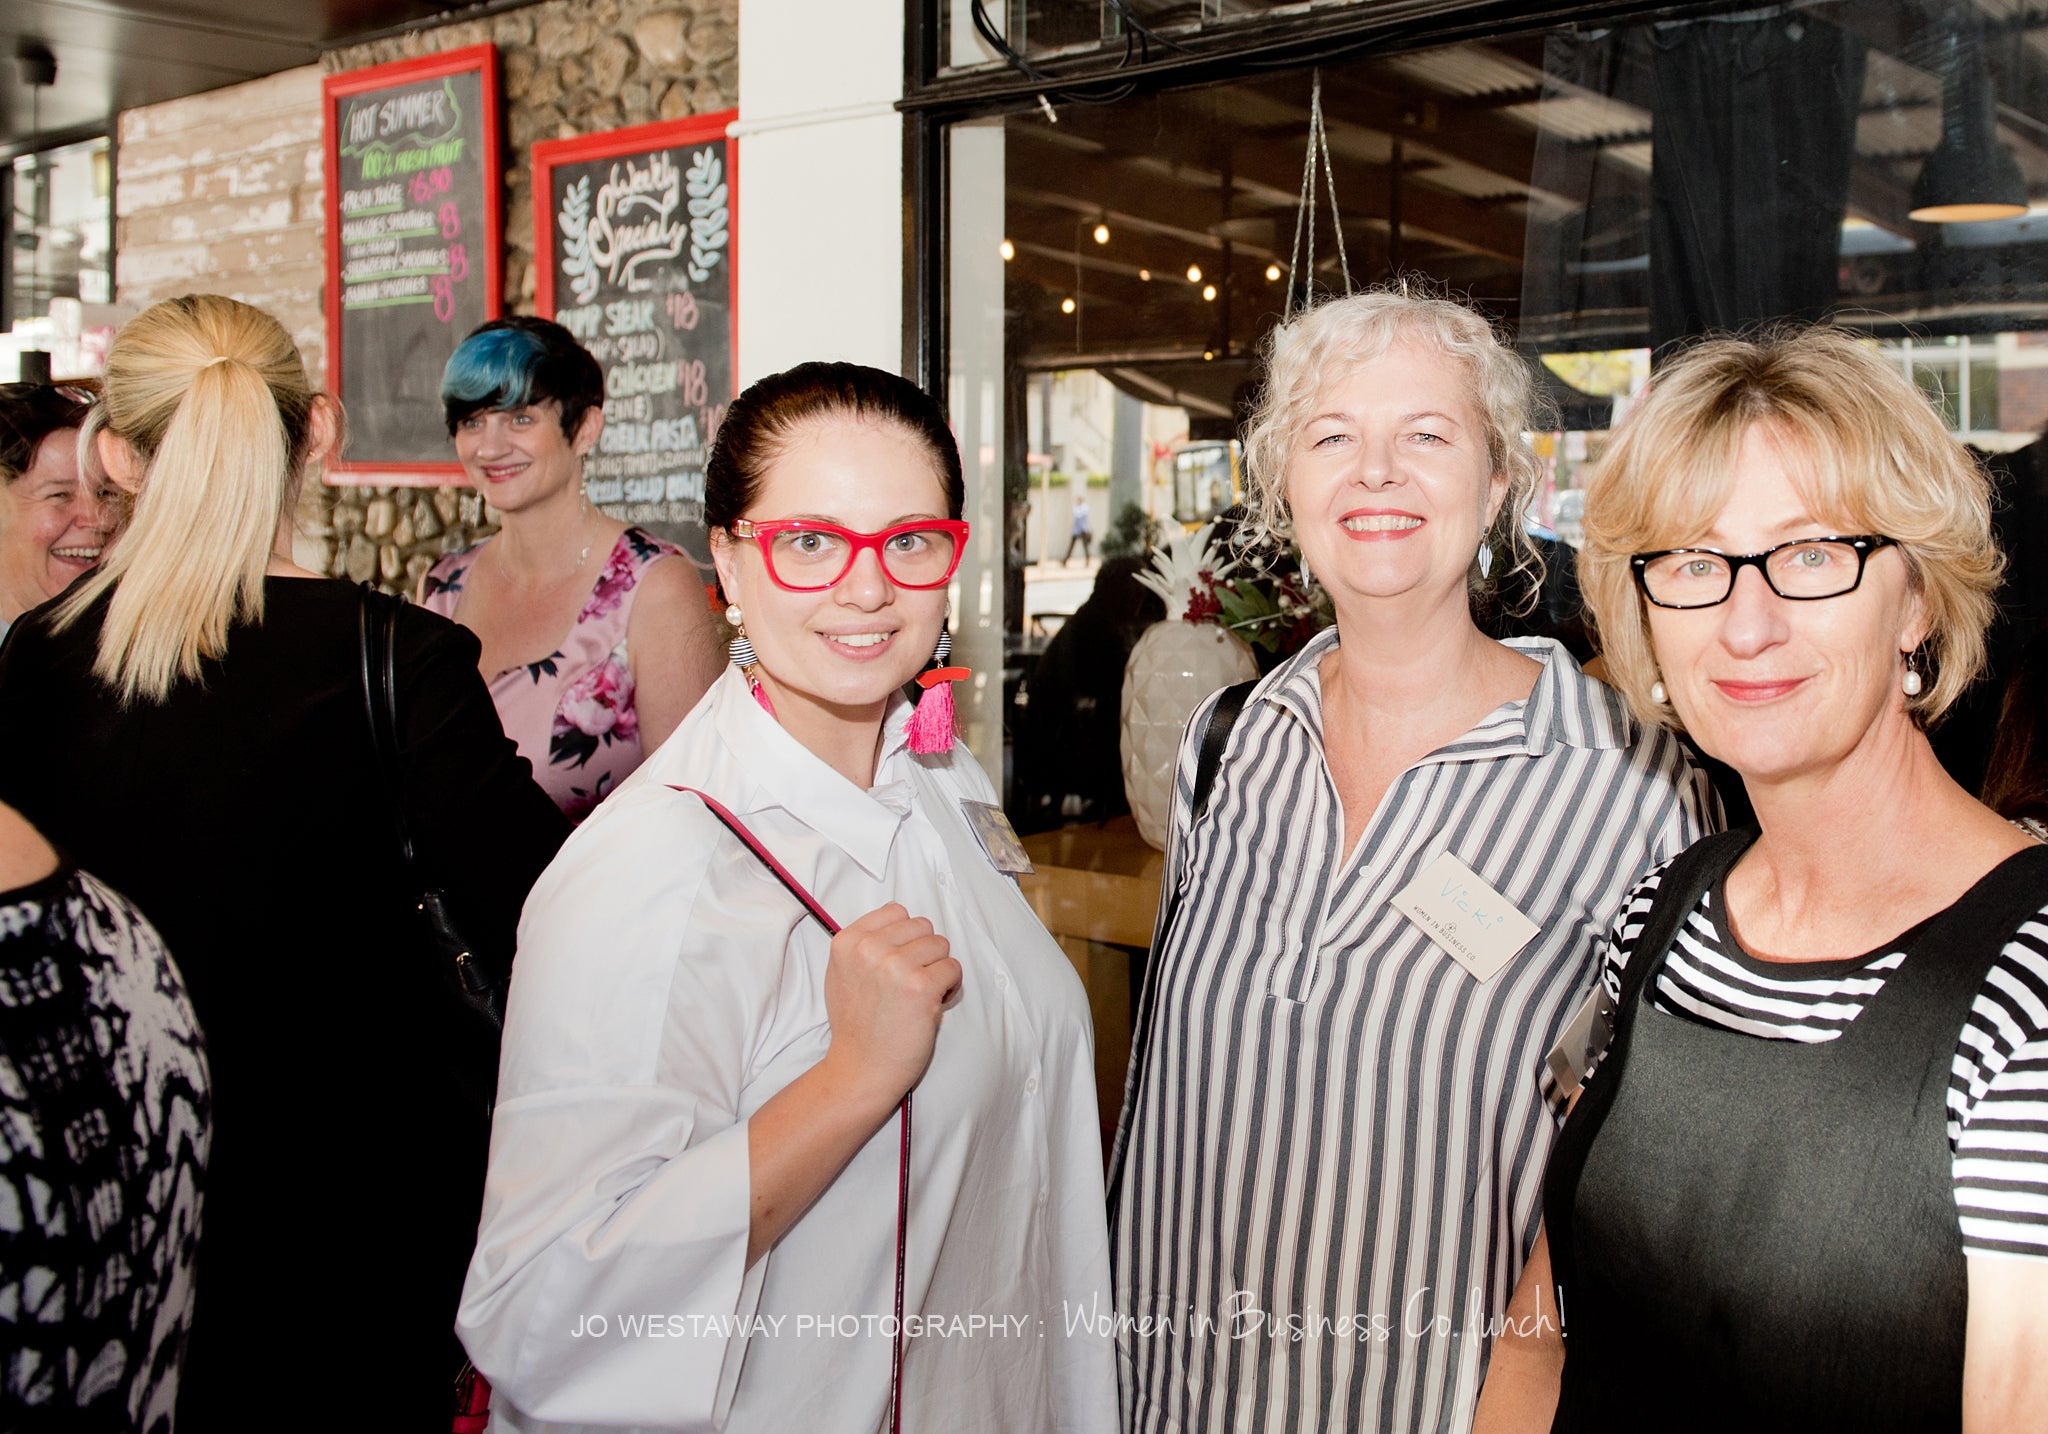 Event photos by Brisbane photographer - great for marketing